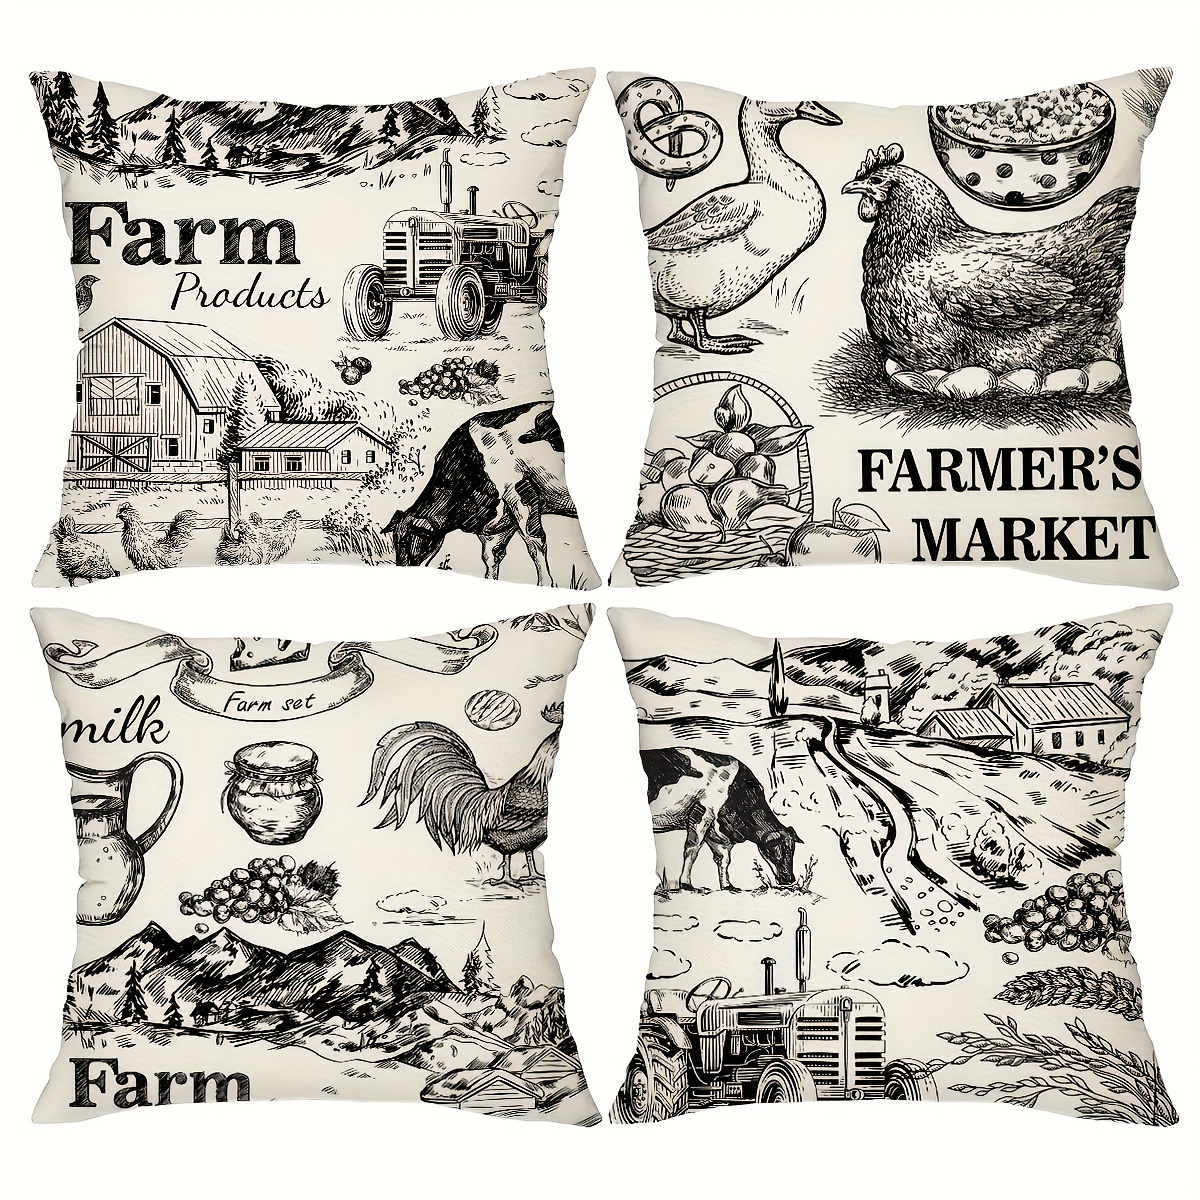 

4-pack Country-rustic Farmhouse Throw Pillow Covers, 18x18", Machine Washable, Vintage Farm Animal & Barn Designs, Linen Feel Polyester With Zipper Closure For Living Room Decor